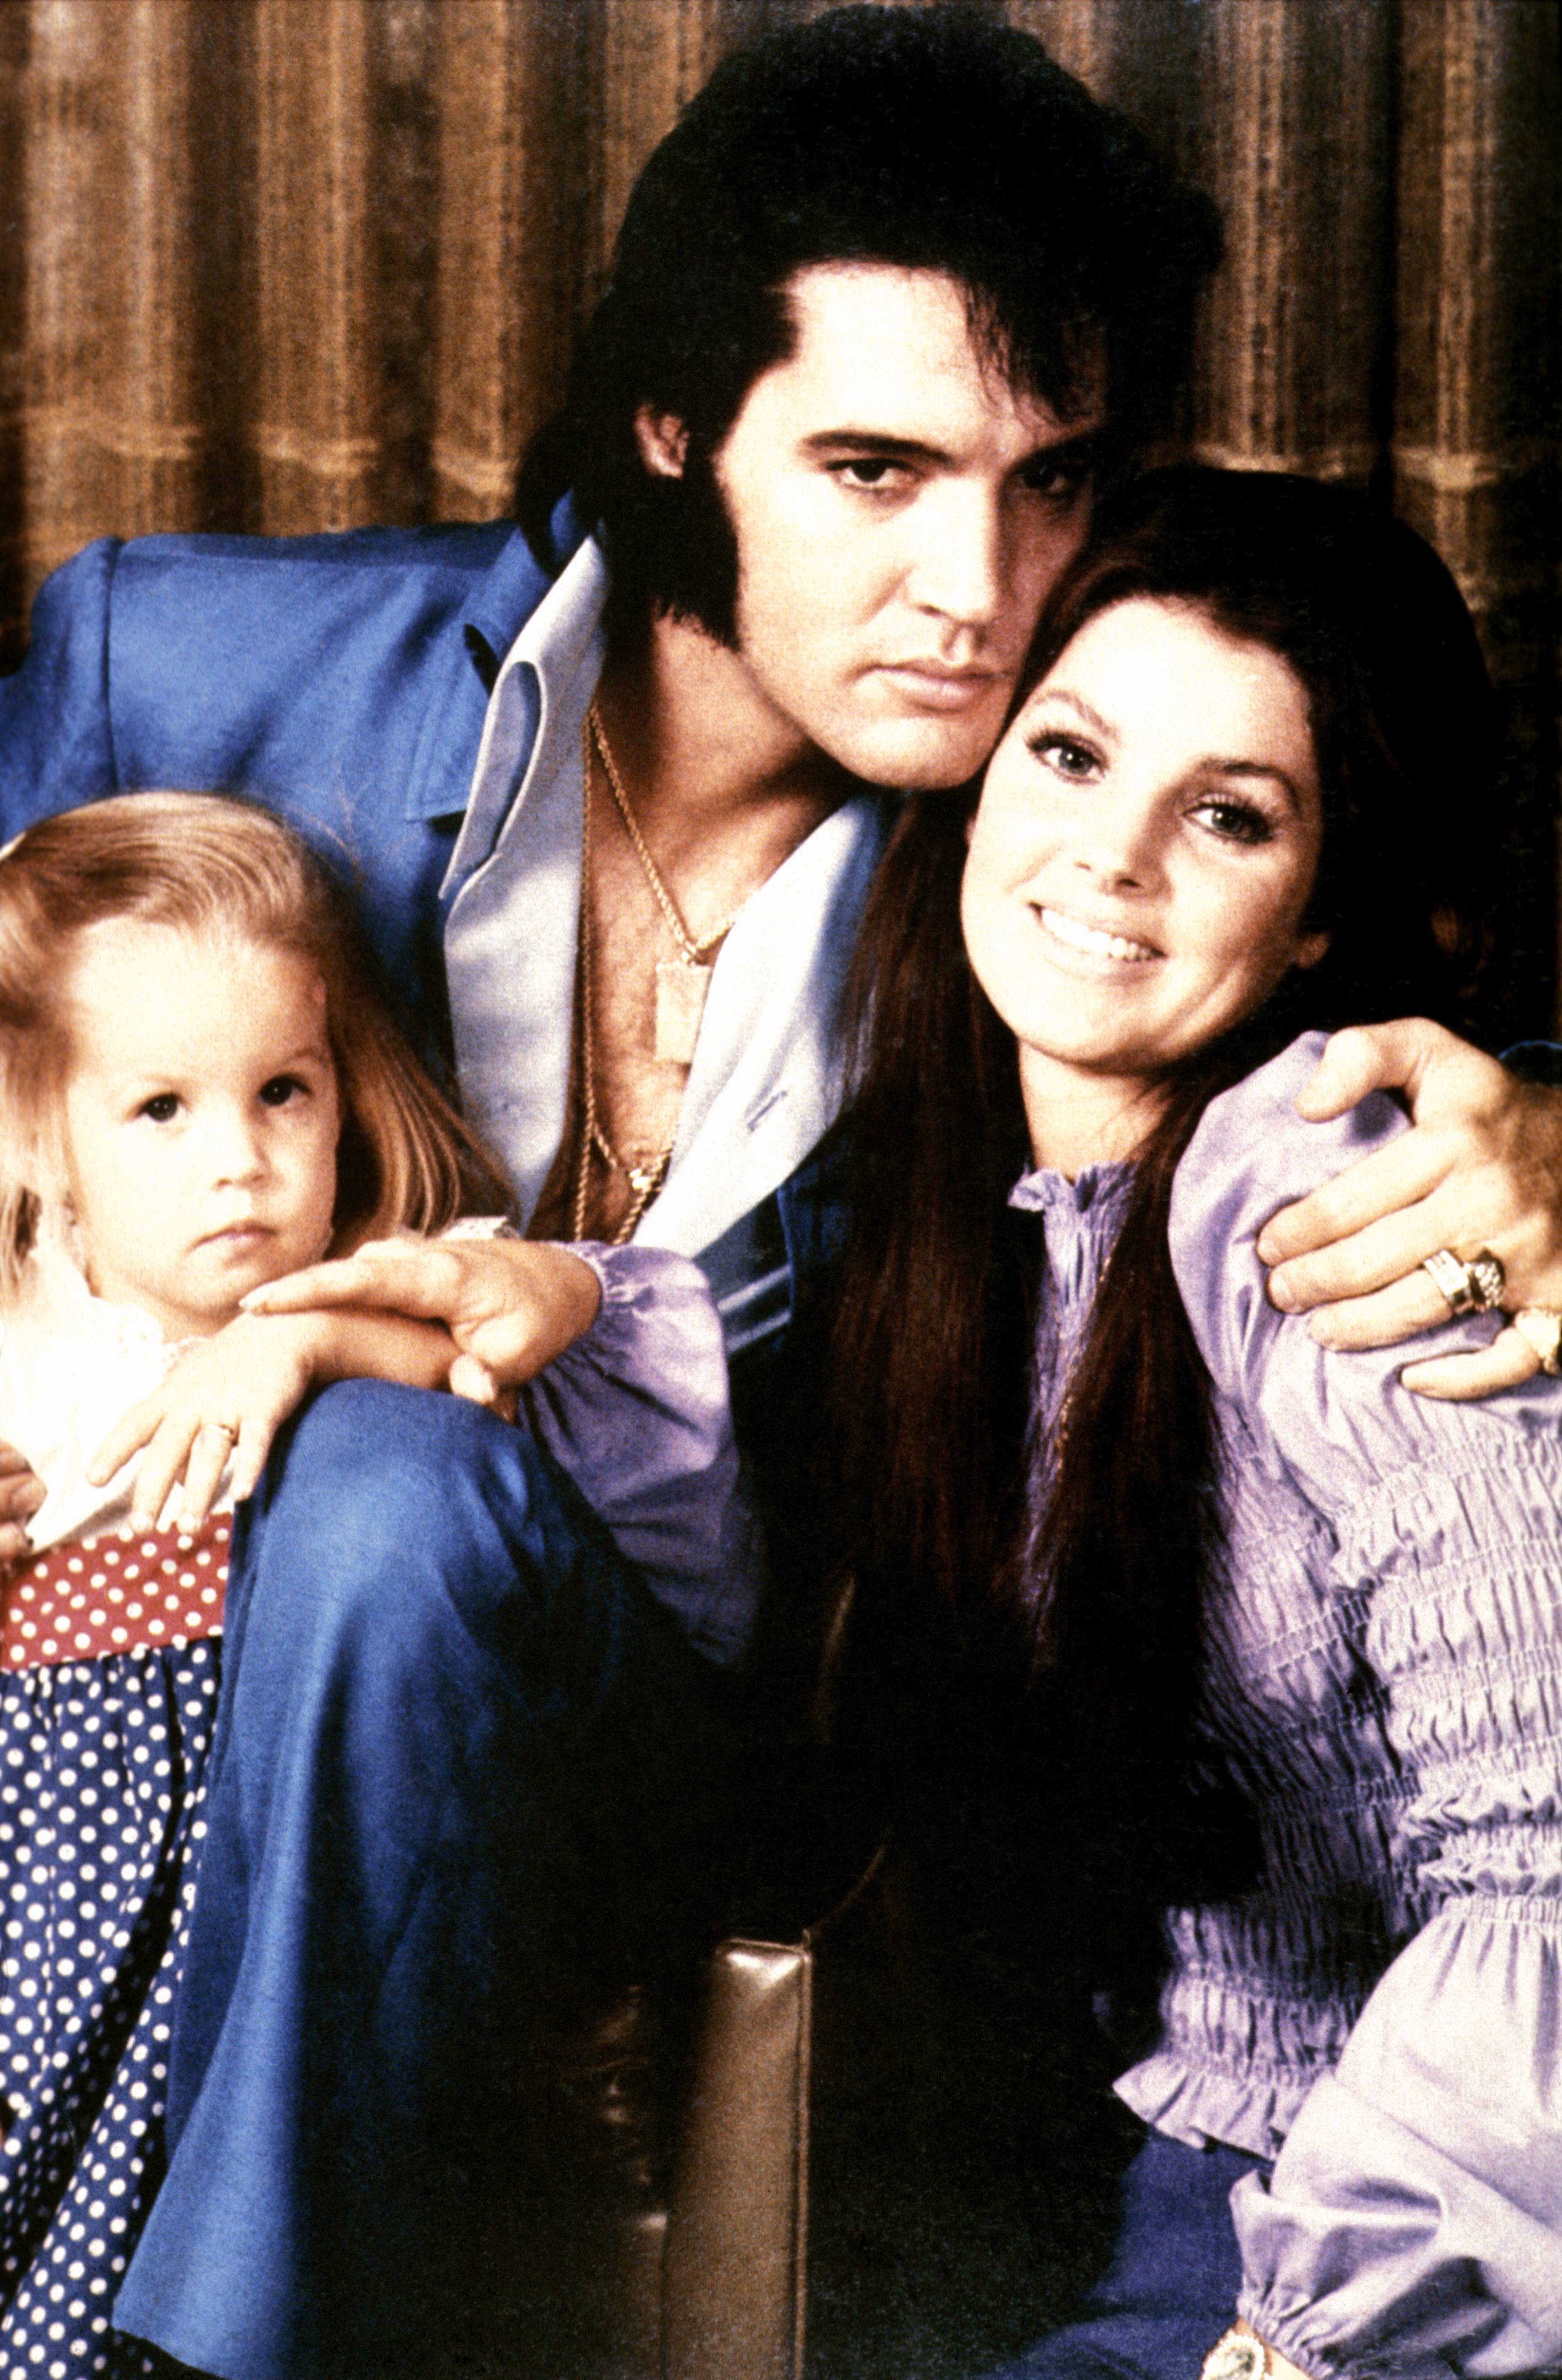 USA Photo of Lisa-Marie PRESLEY and Priscilla PRESLEY and Elvis PRESLEY, with his wife Priscilla and daughter Lisa-Marie - c.1970